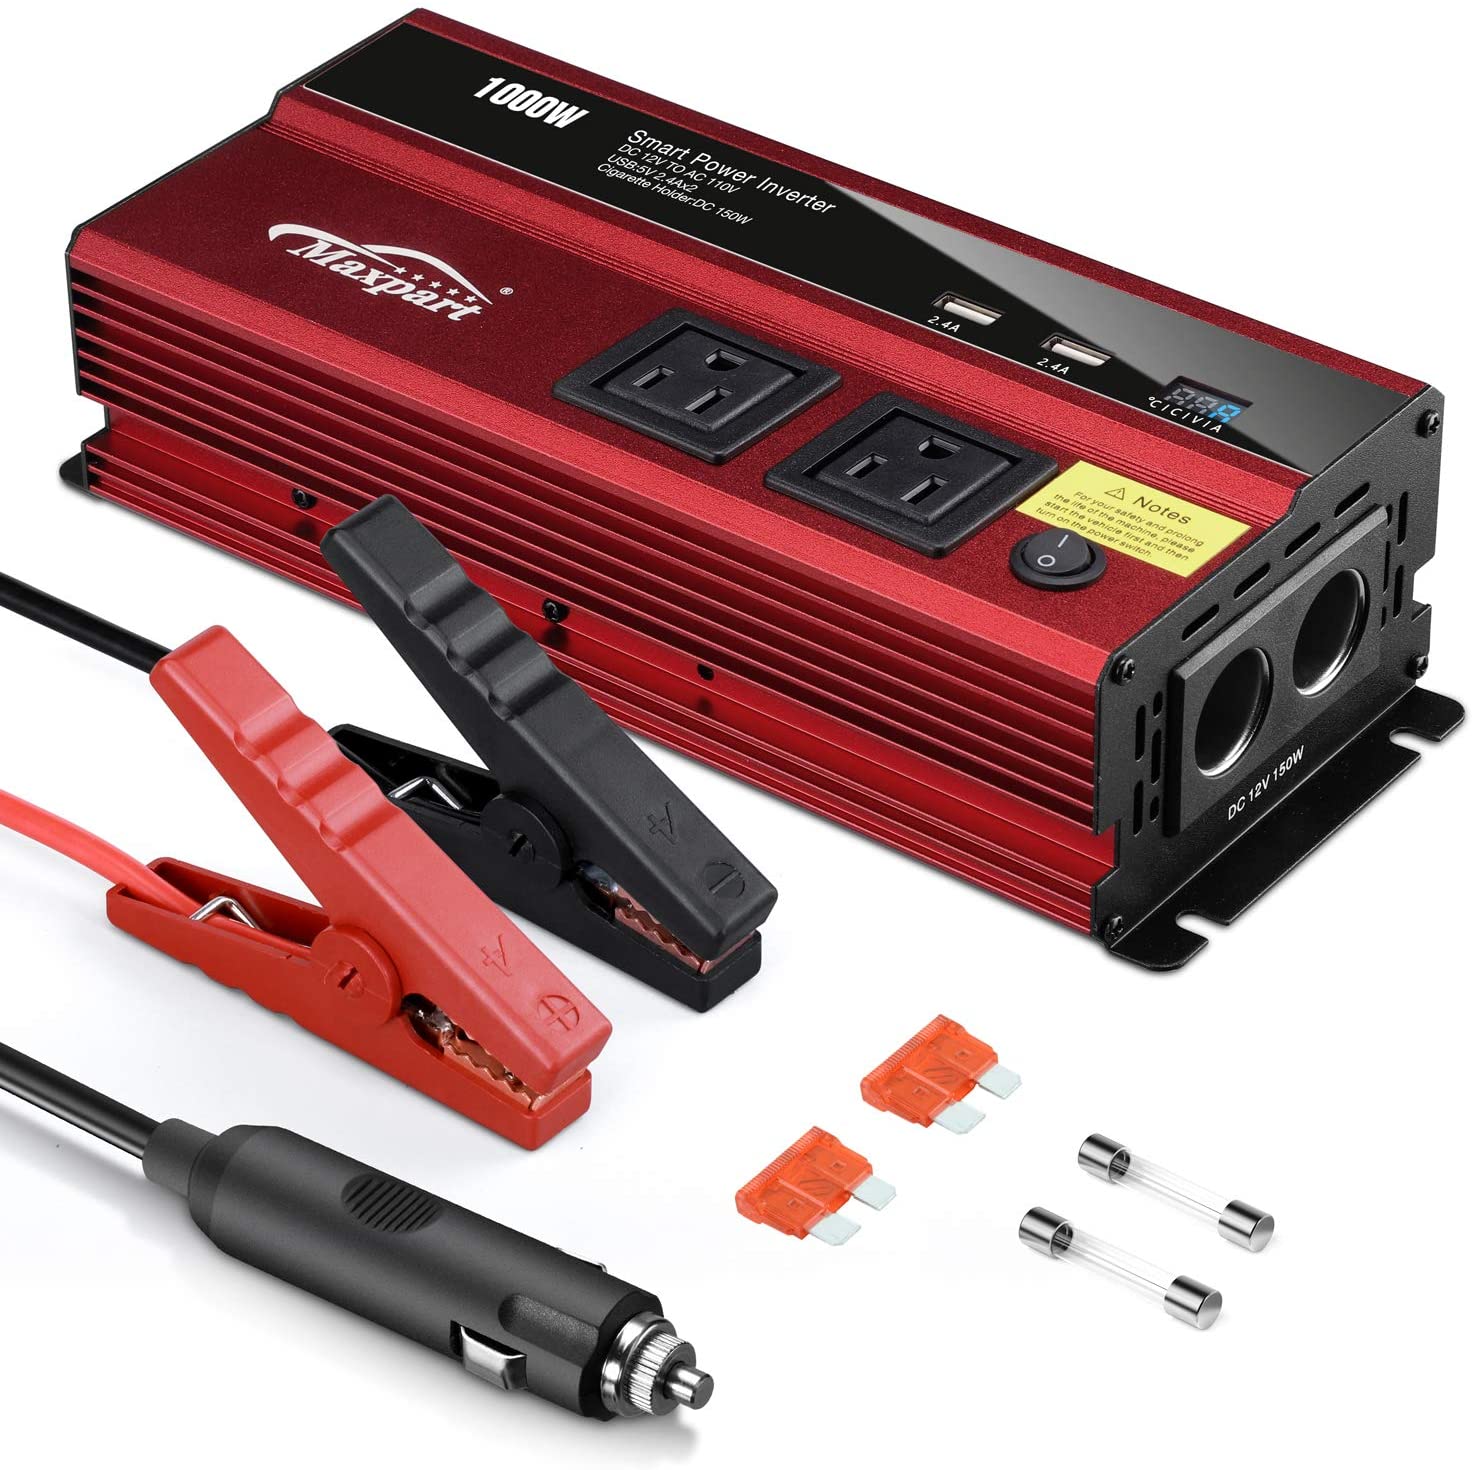 Maxpart 1000W Power Inverter Truck - modified sine wave top inverters for vehicles